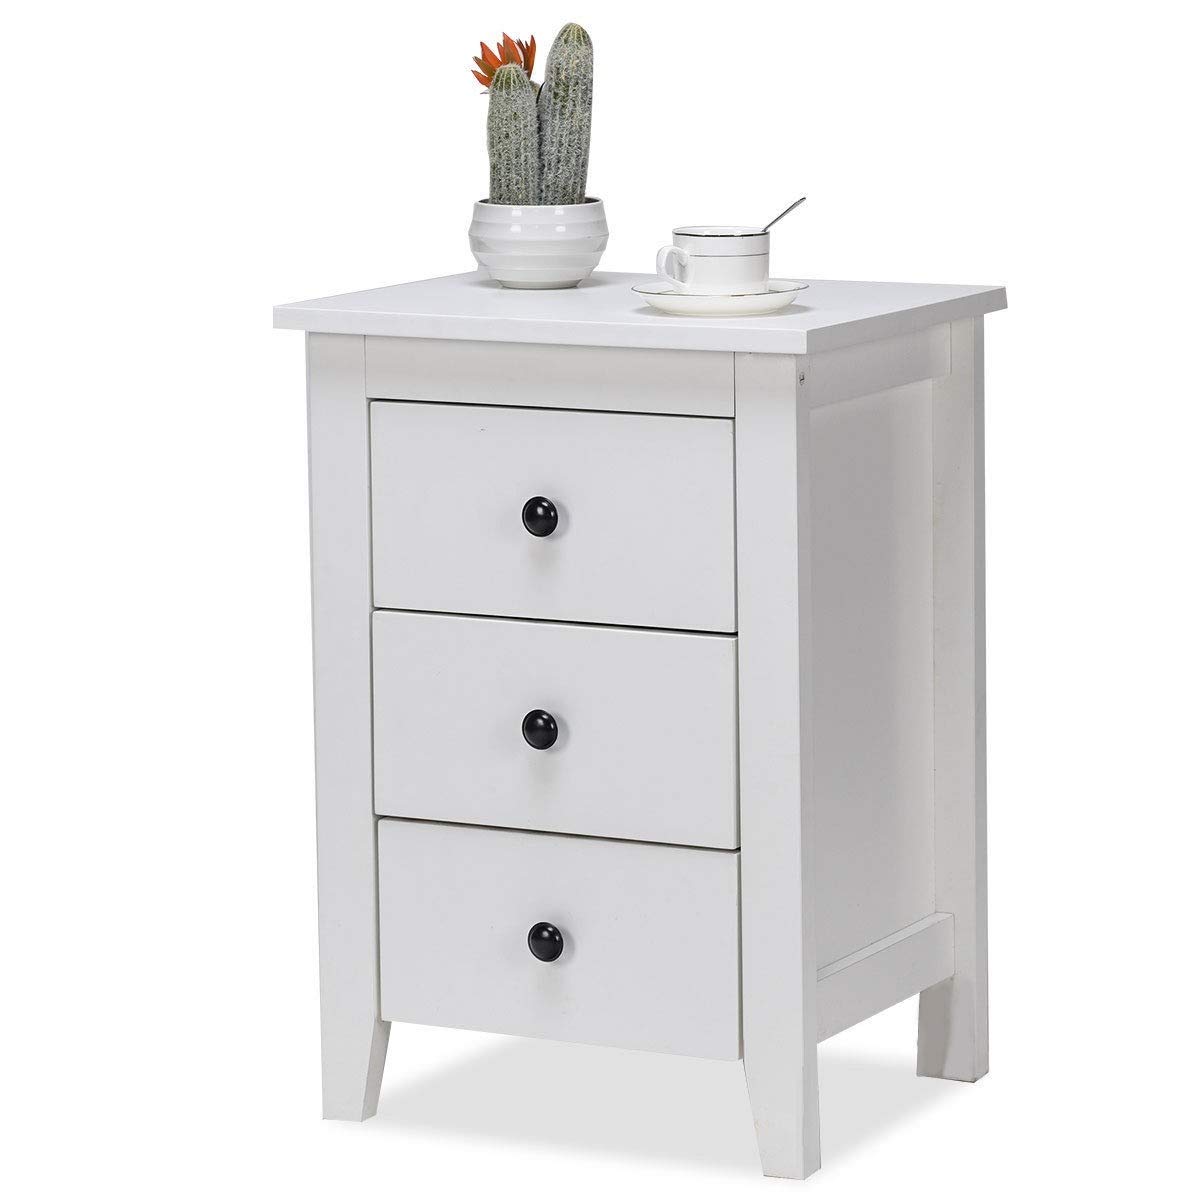 nightstand side end tables waterjoy modern accent table large white drawer cabinet for bedroom living room drawers kitchen dining decorative chests cabinets cordless lamps west